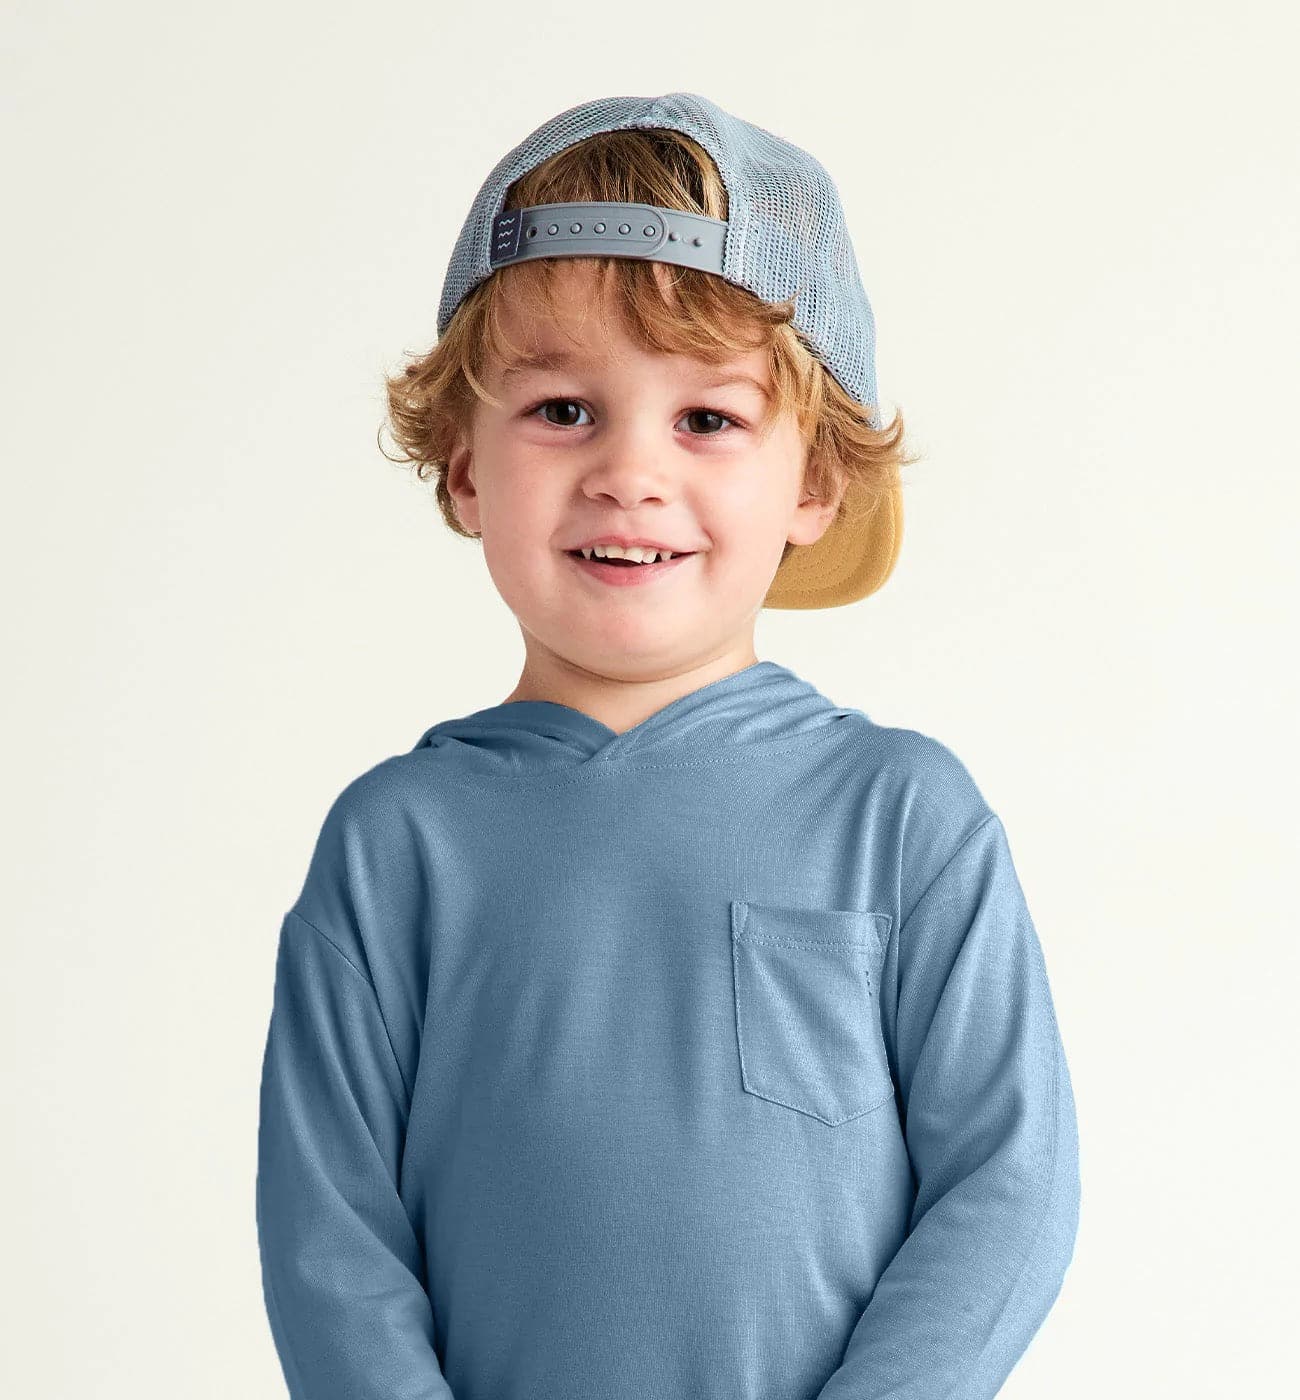 Featuring the Toddler Bamboo Shade Hoody kid's and babies, kid's thermal layering manufactured by Free Fly shown here from a ninth angle.